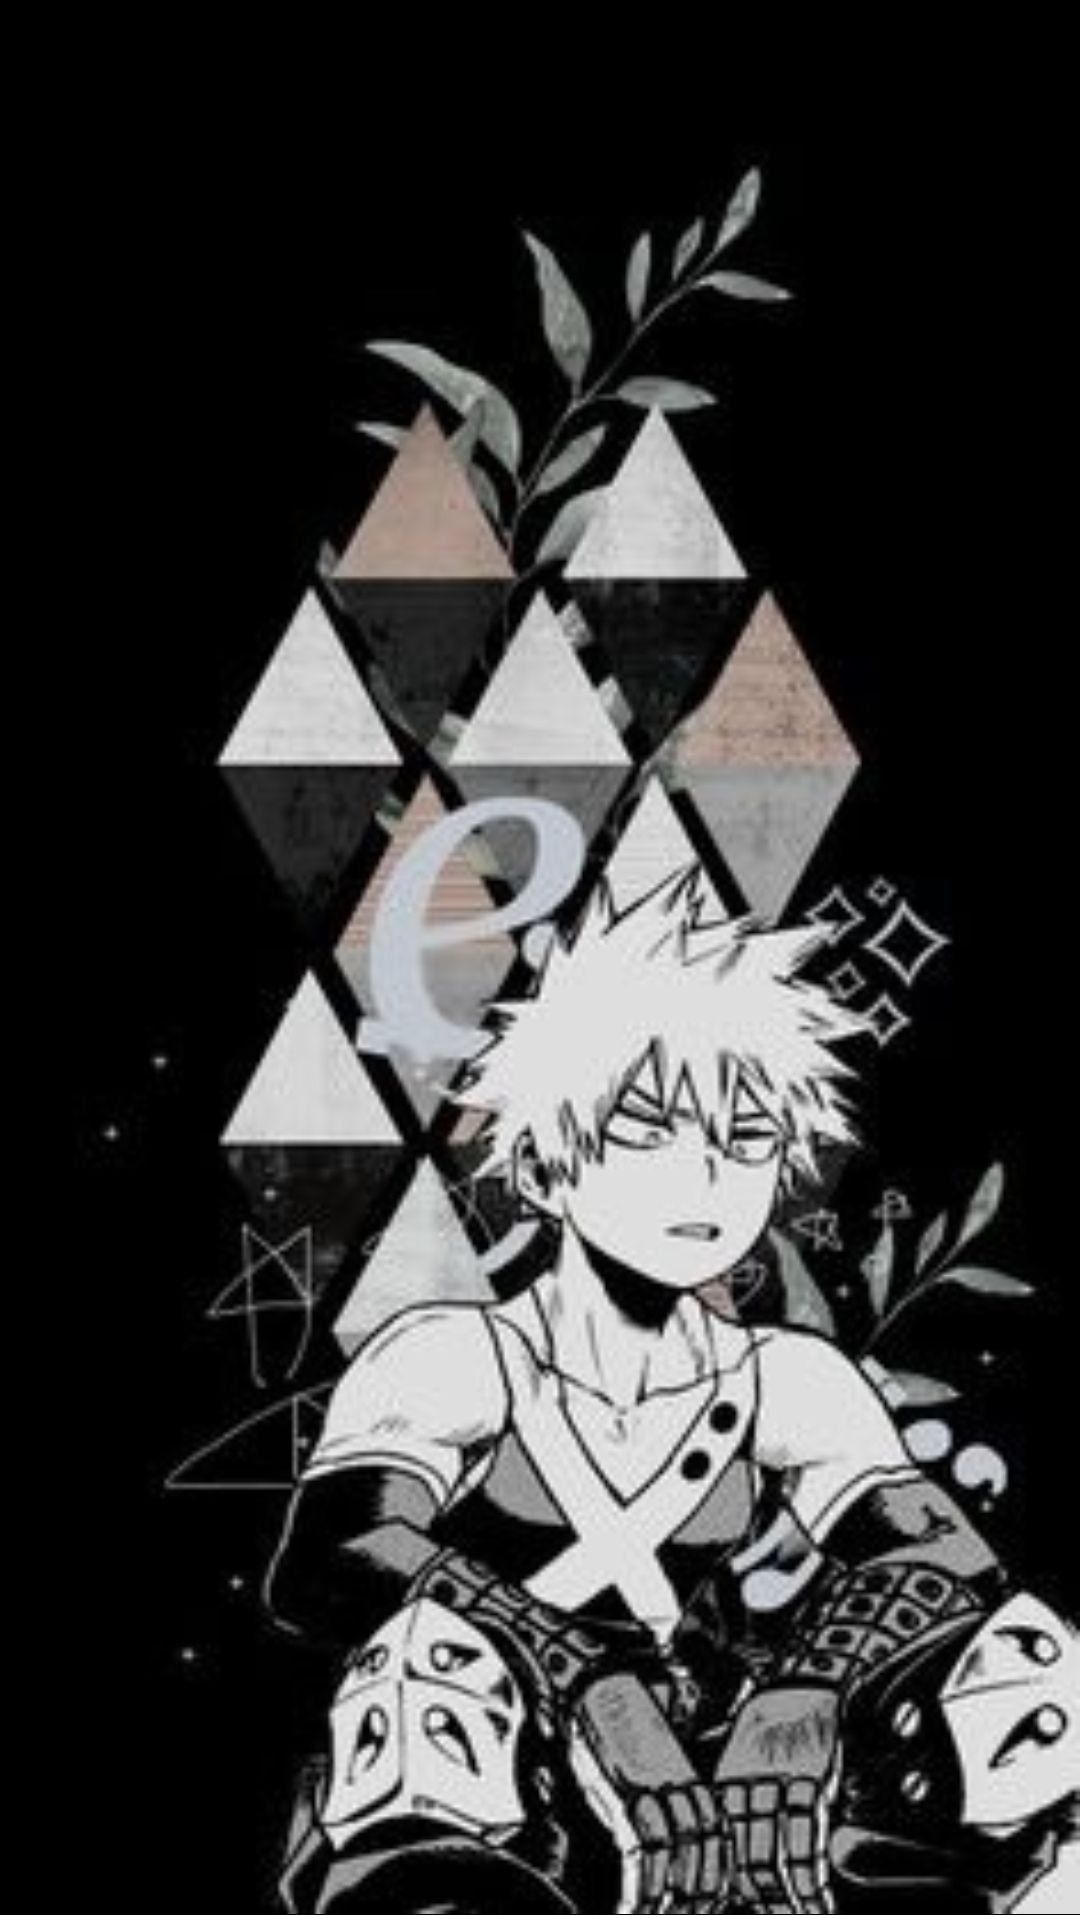 BNHA WALLPAPERS AND AESTHETICS